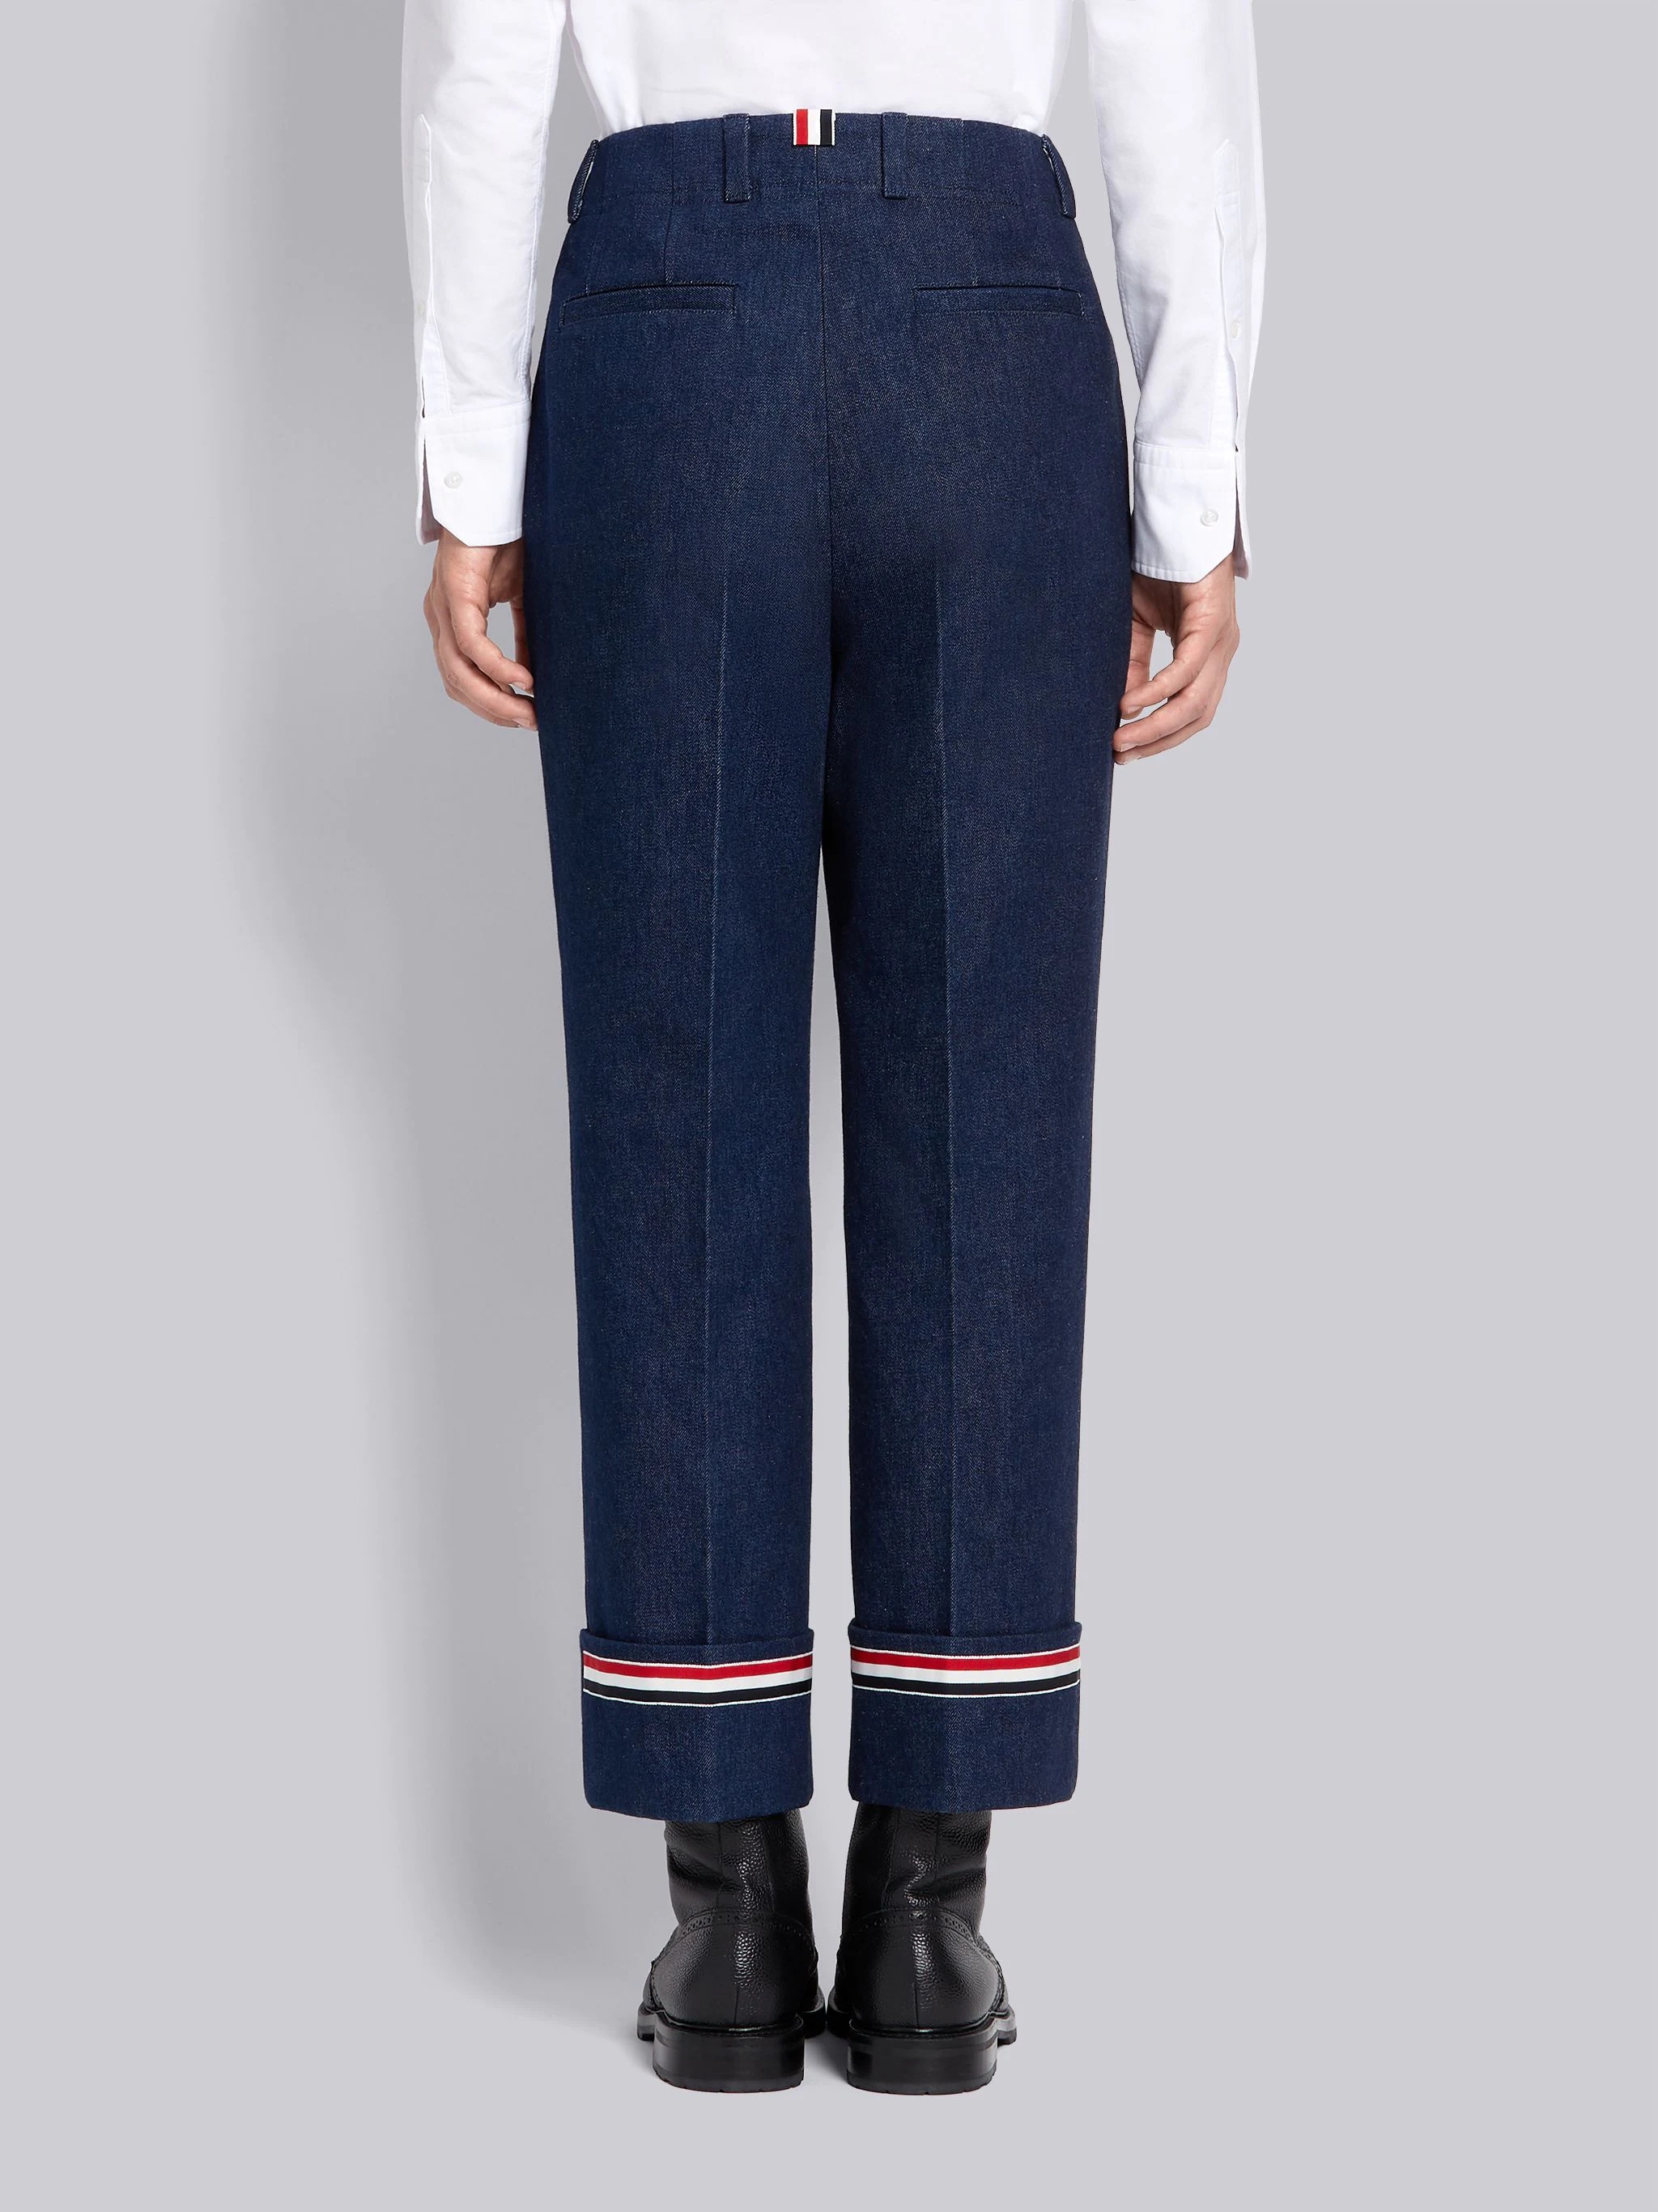 Navy Washed Cotton Denim Deconstructed Cuffed Classic Trouser - 3